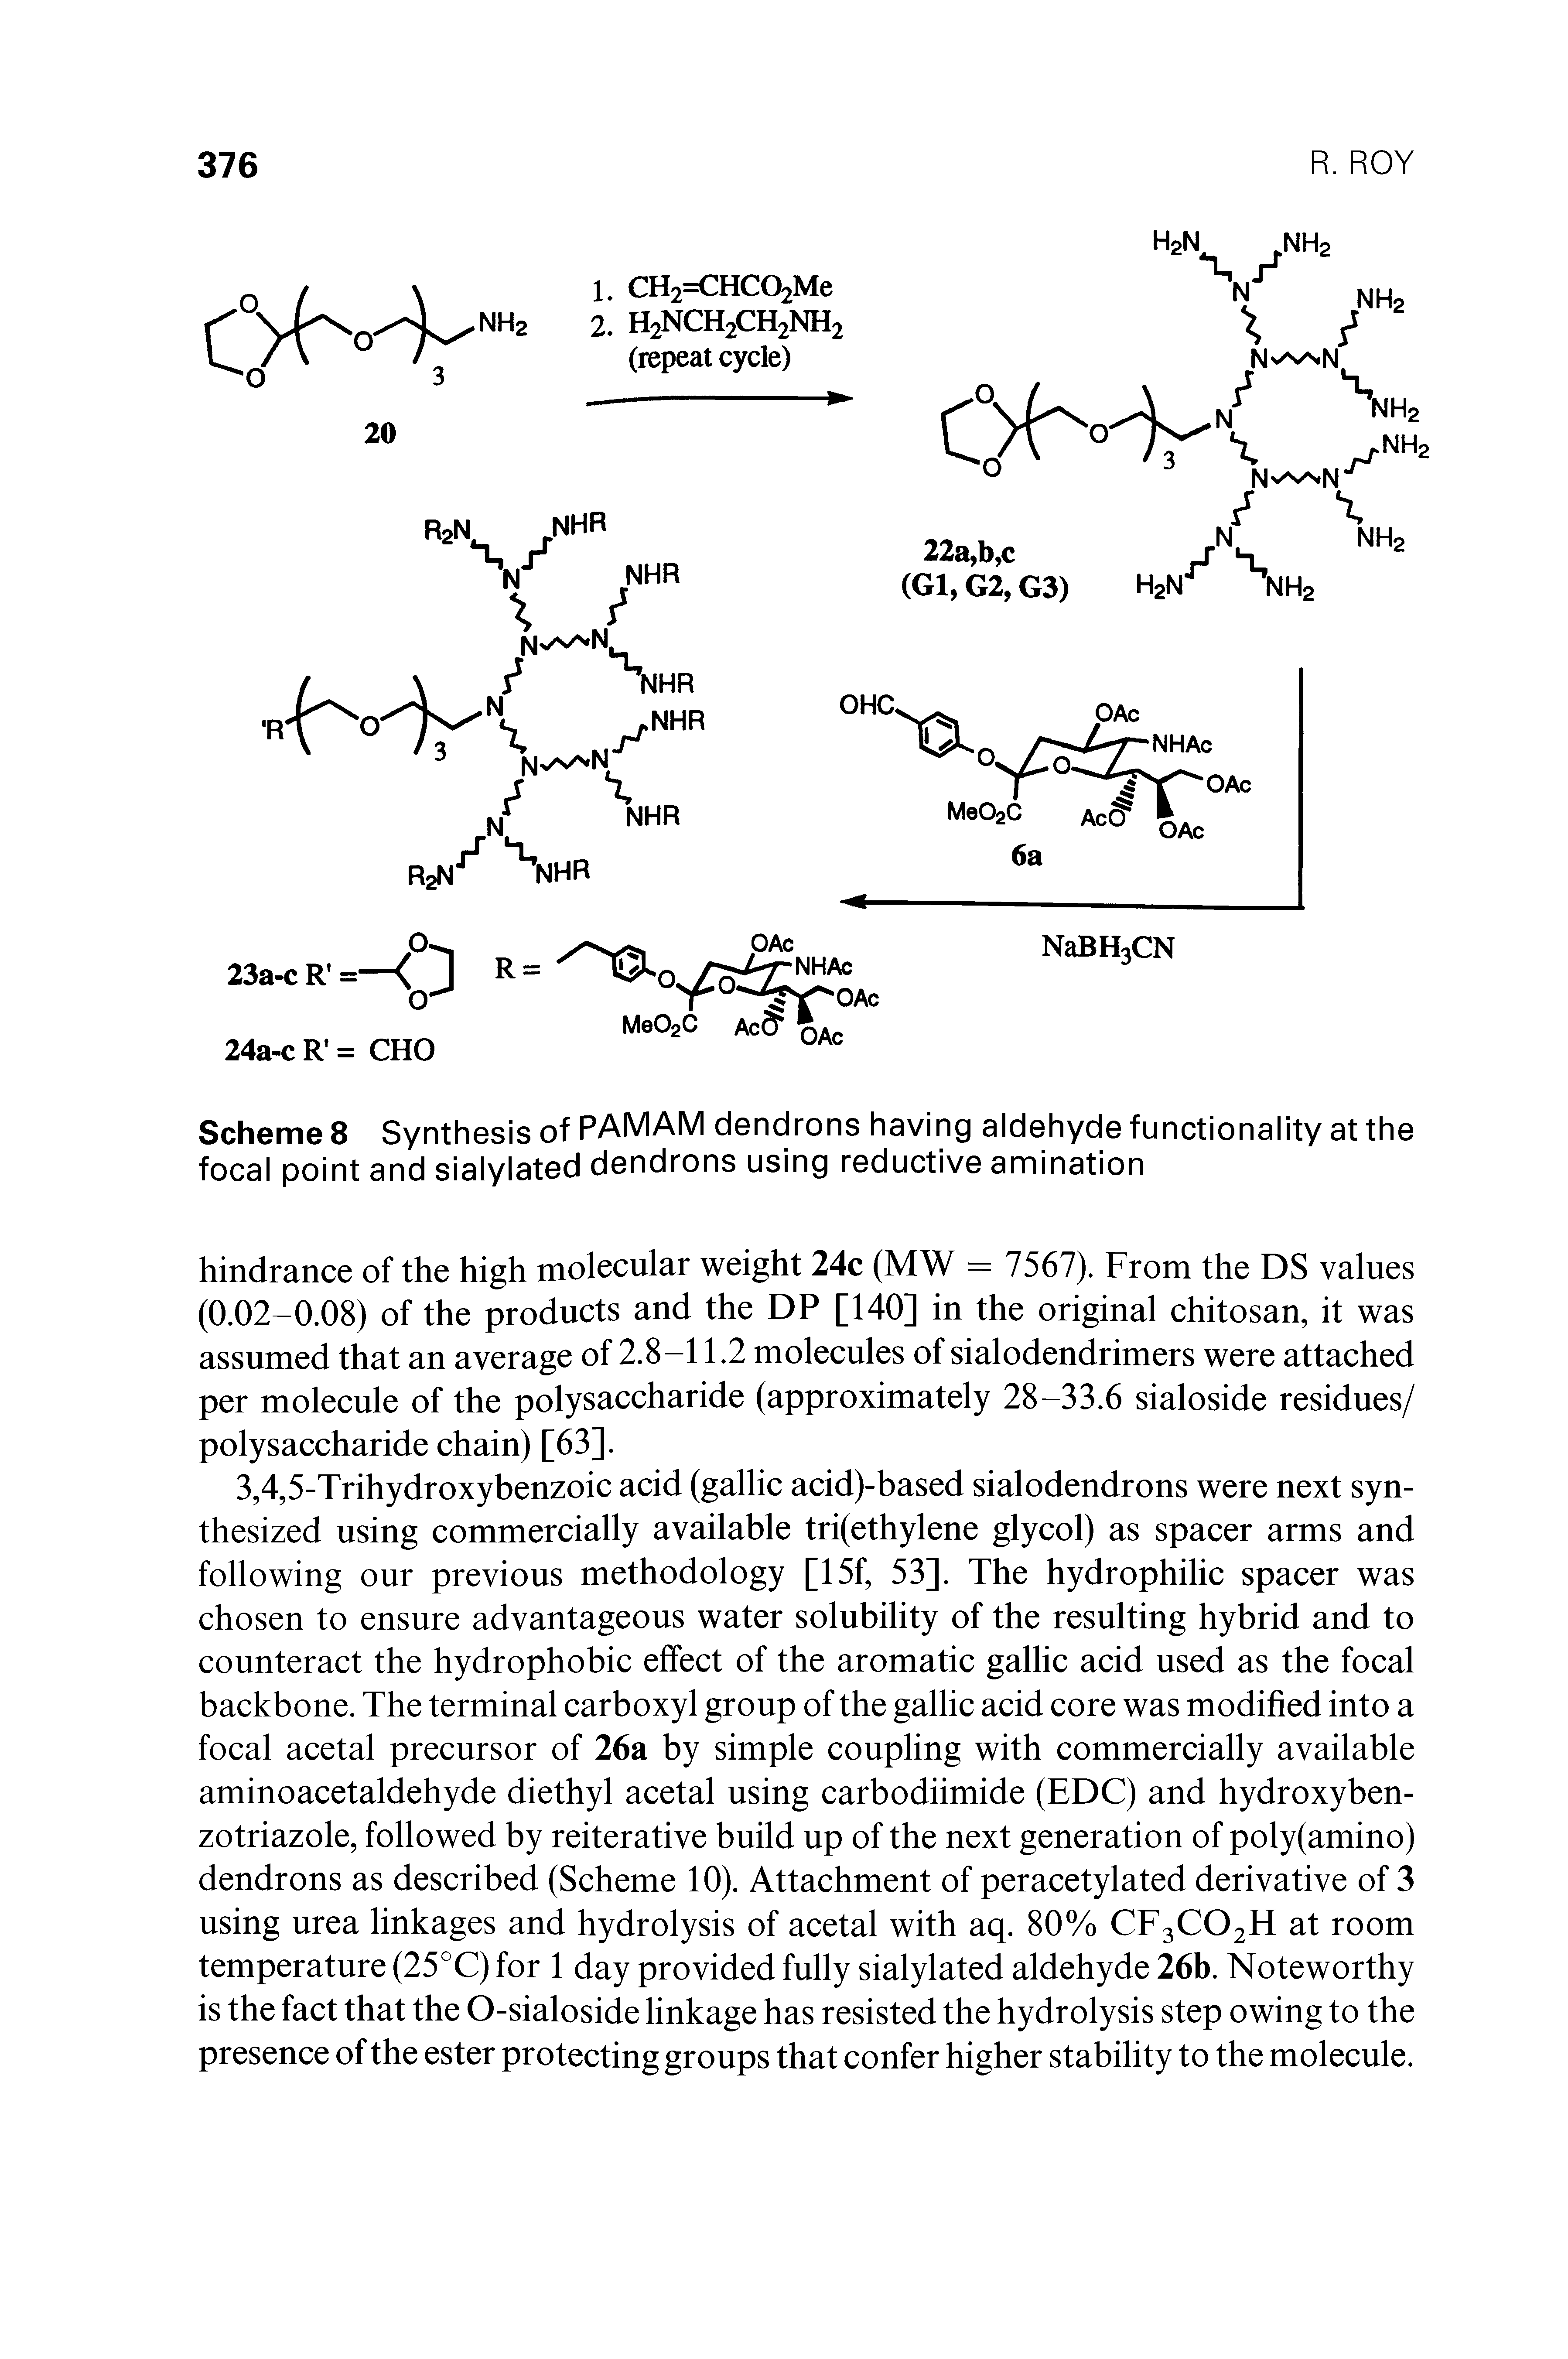 Scheme 8 Synthesis of PAMAM dendrons having aldehyde functionality at the focal point and sialylated dendrons using reductive amination...